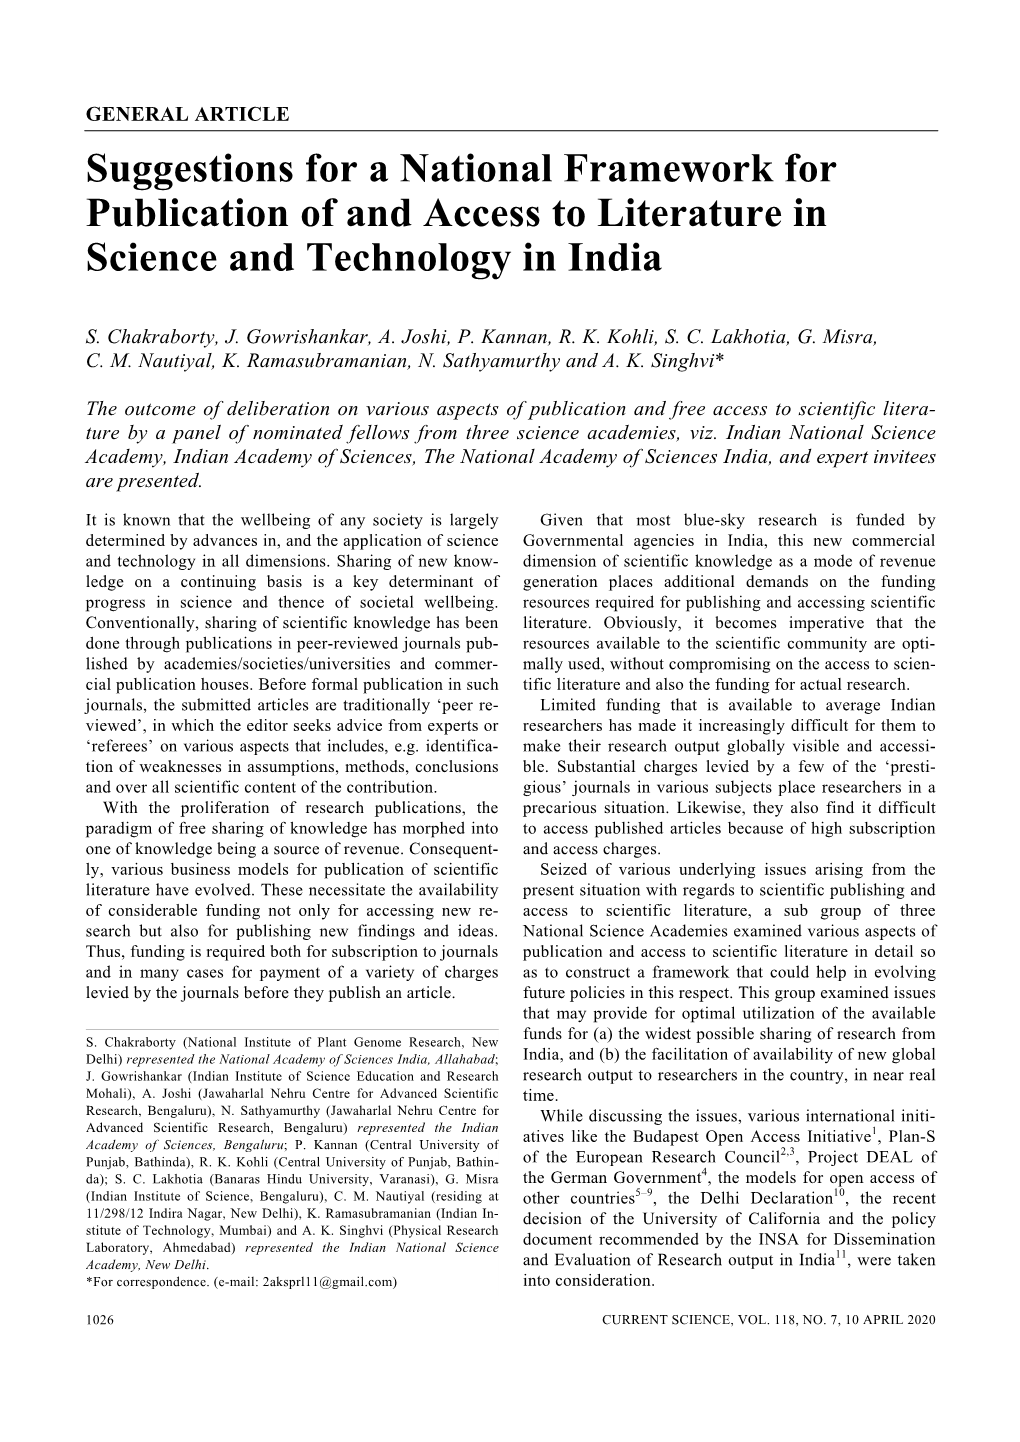 Suggestions for a National Framework for Publication of and Access to Literature in Science and Technology in India